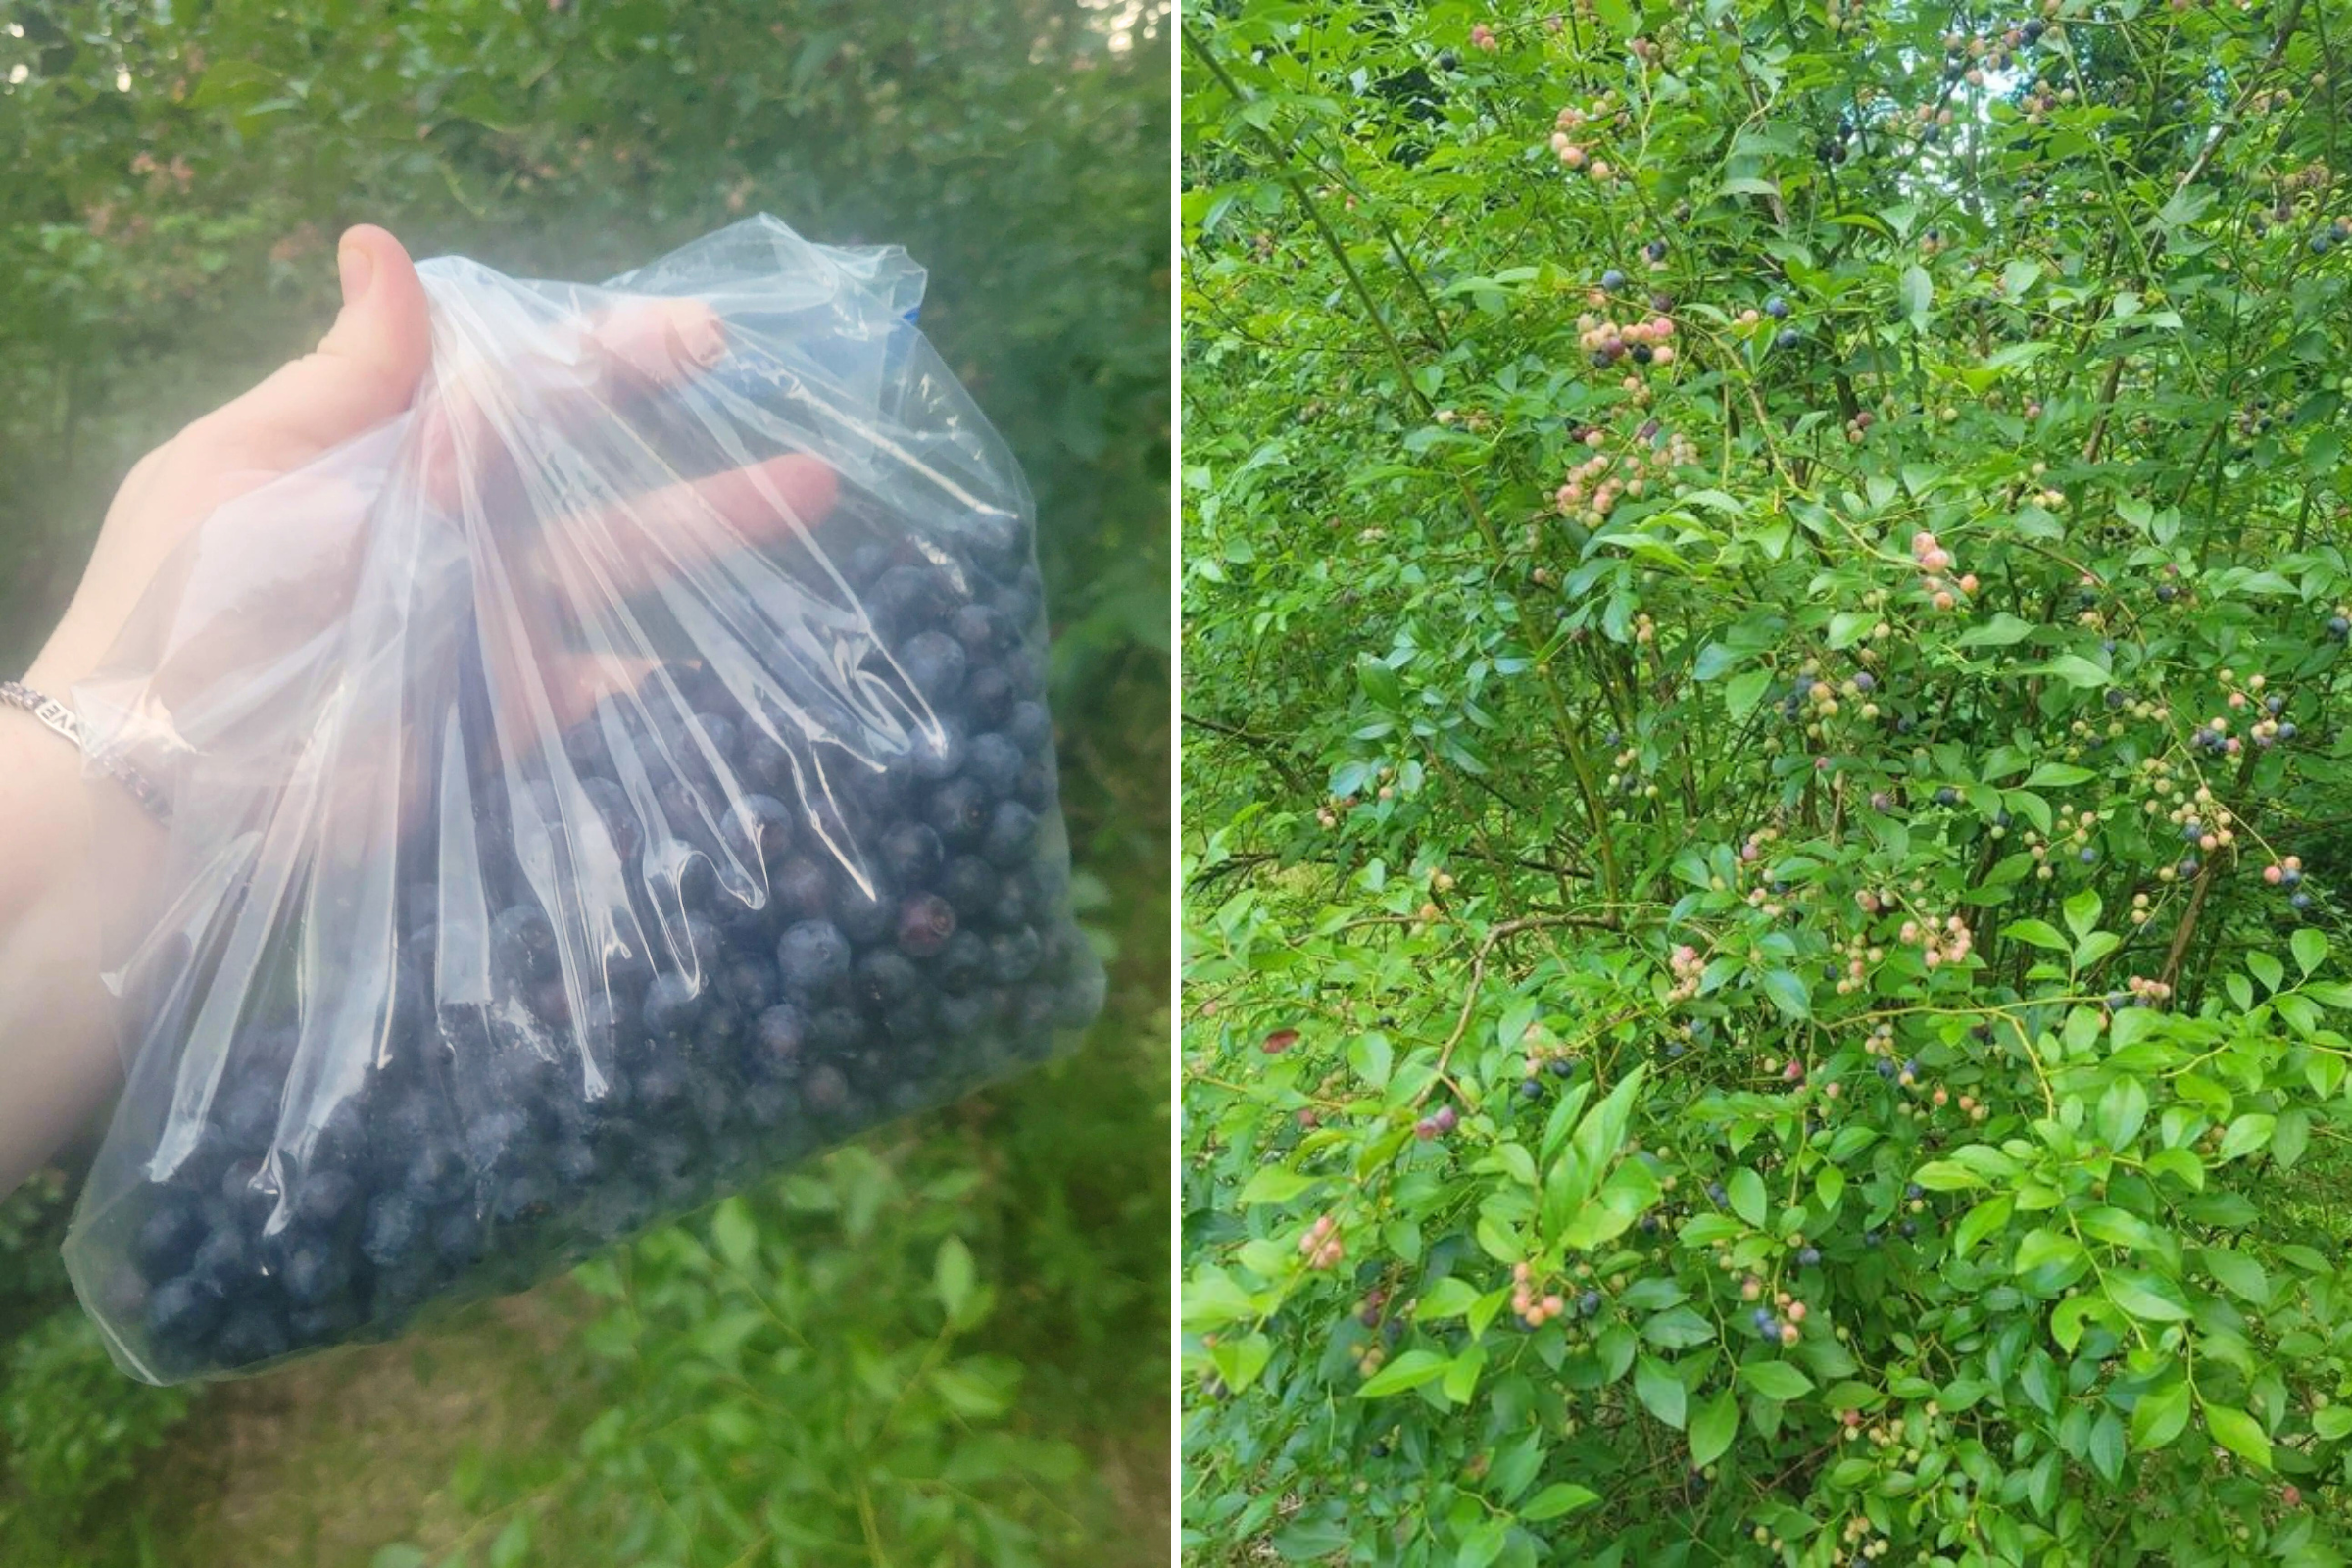 Man furious after neighbors come over uninvited and pick his blueberry bush clean